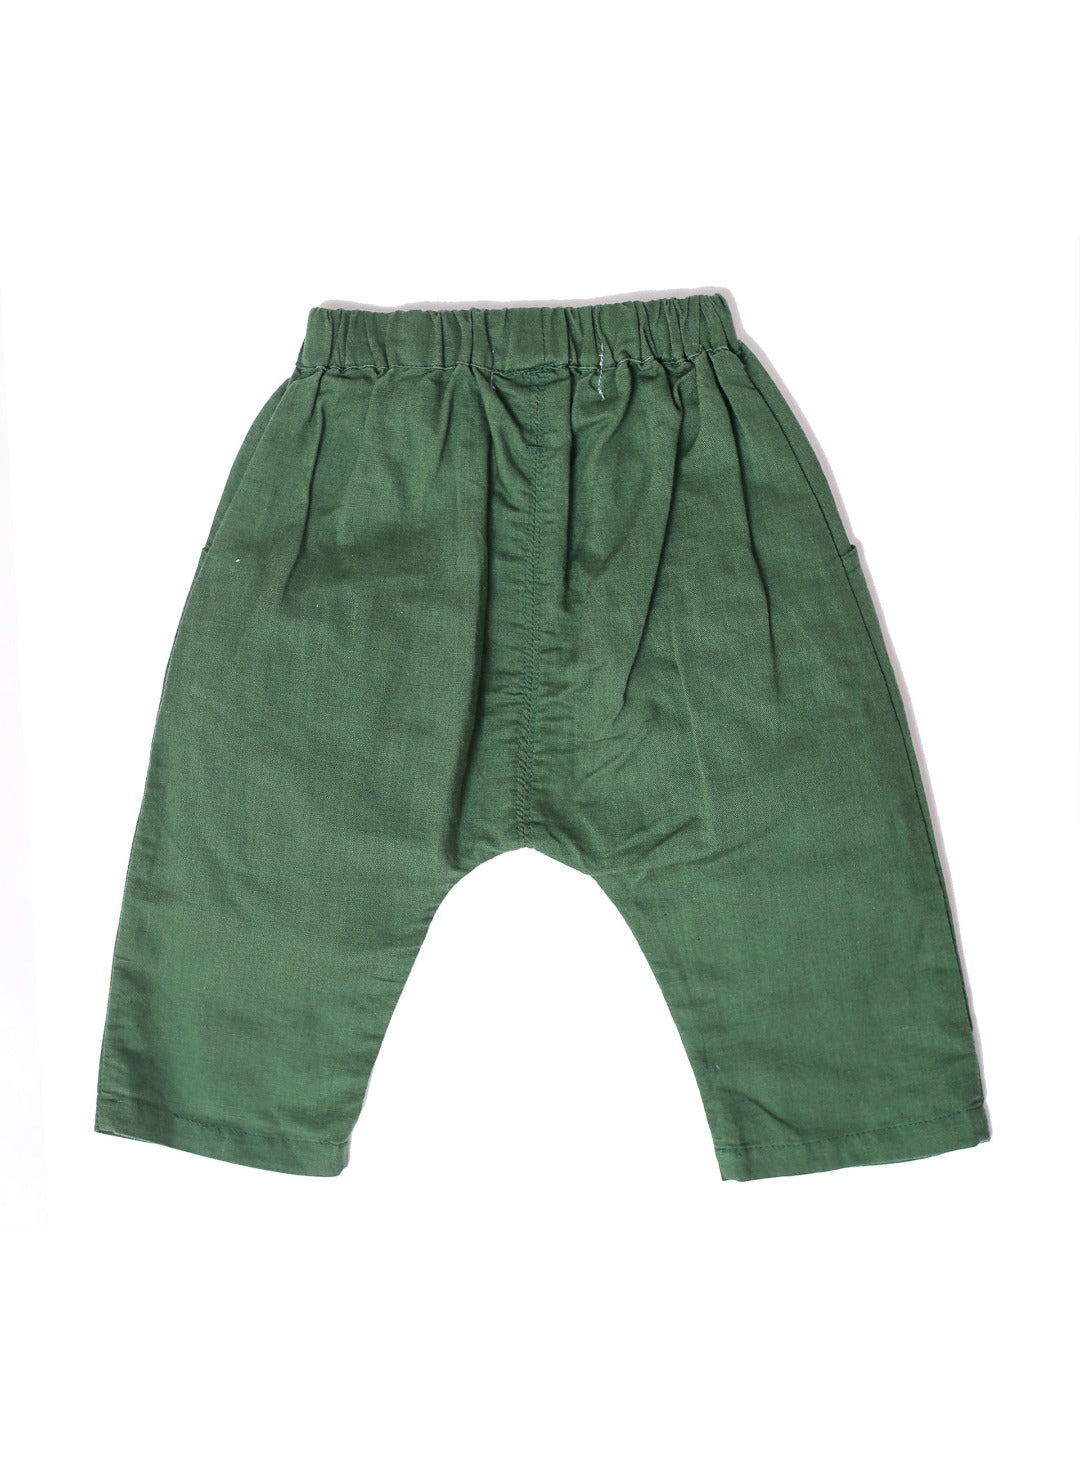 forest green pants with baggy cutting